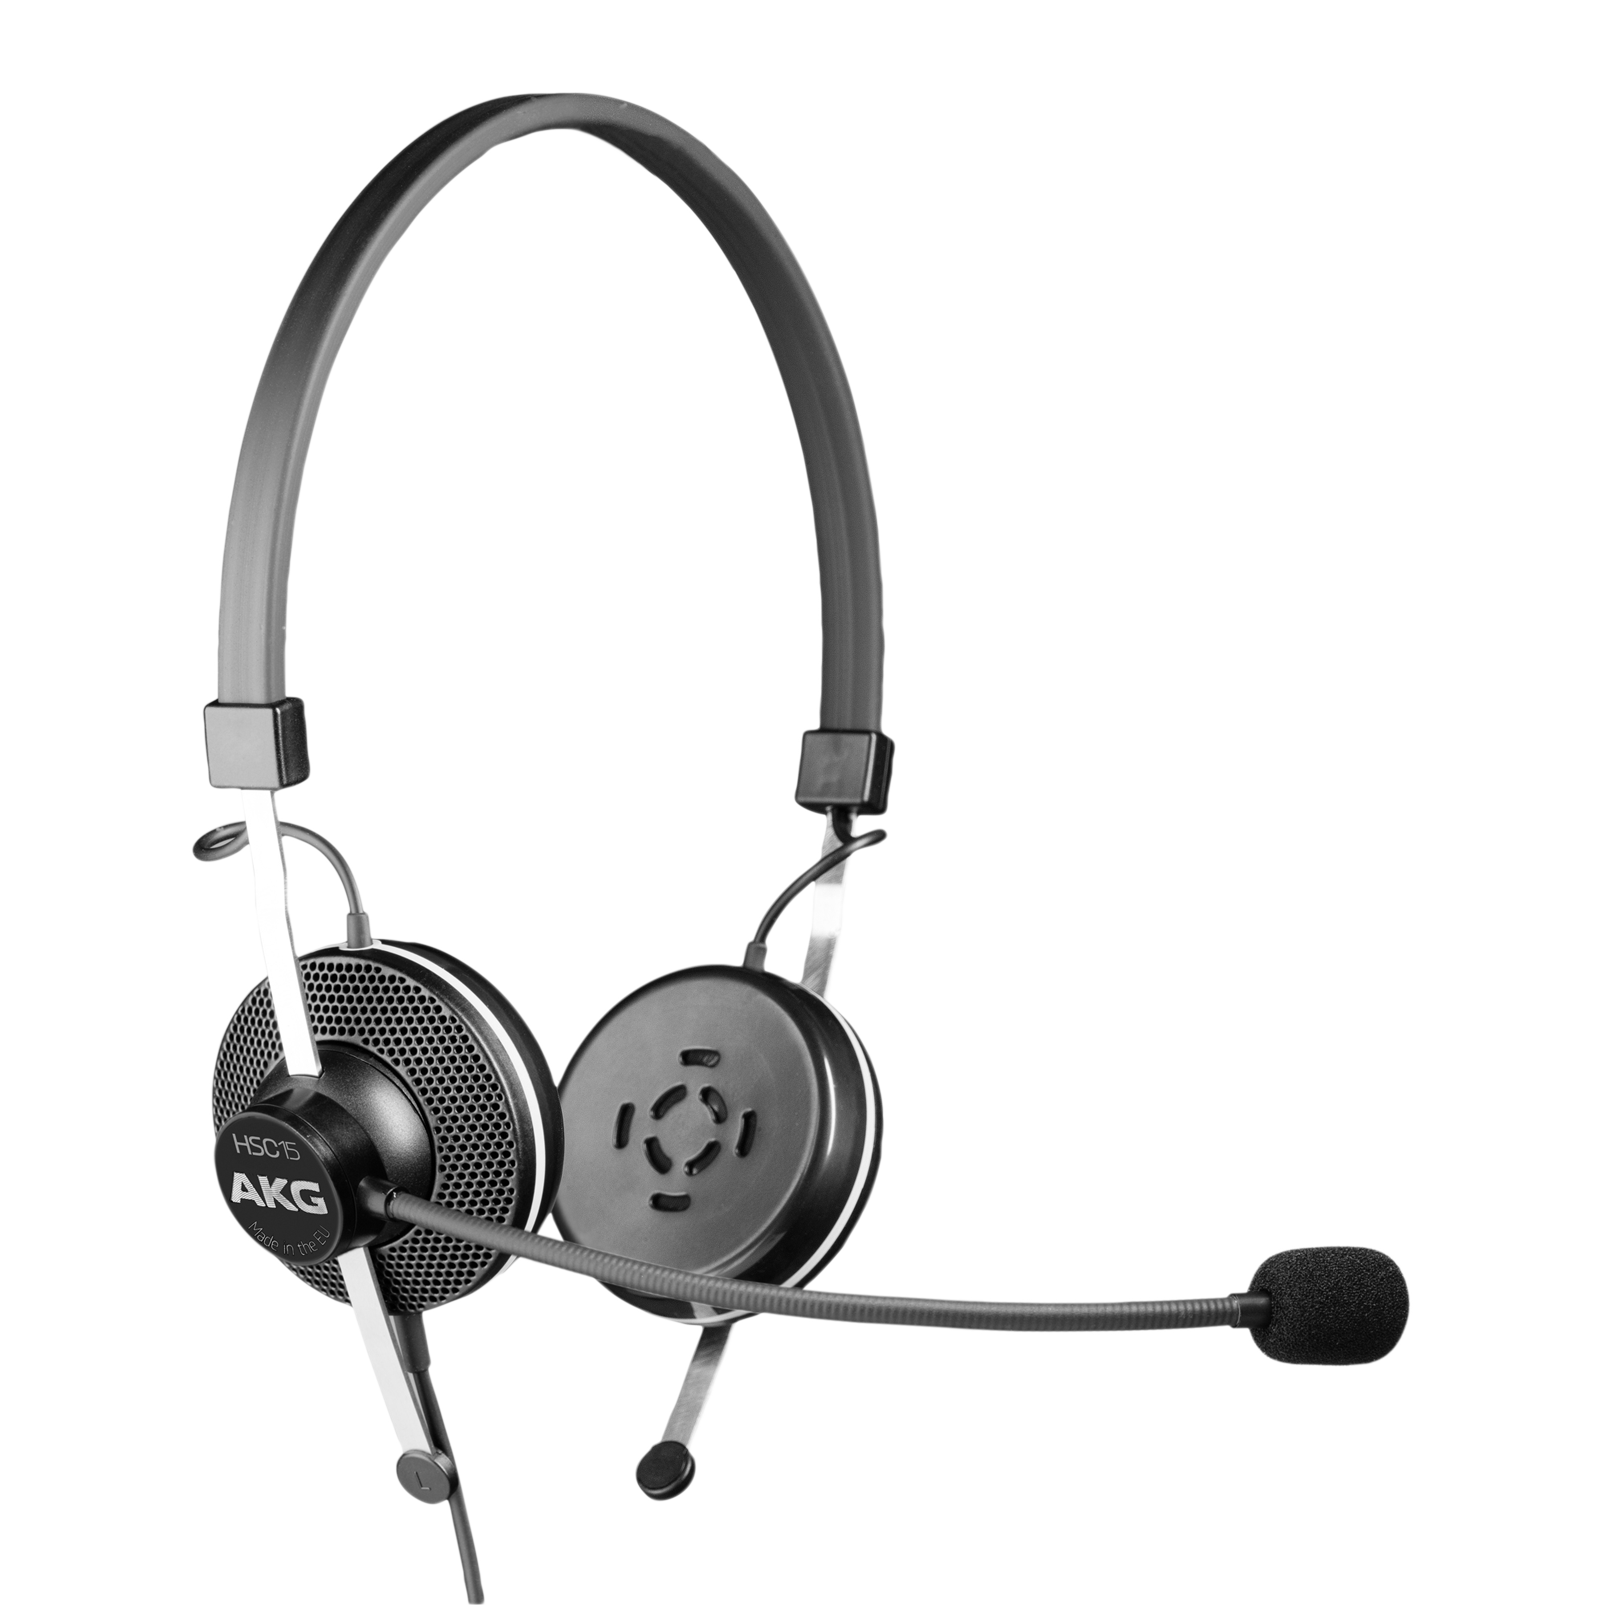 HSC15 - Black - High-performance conference headset - Hero